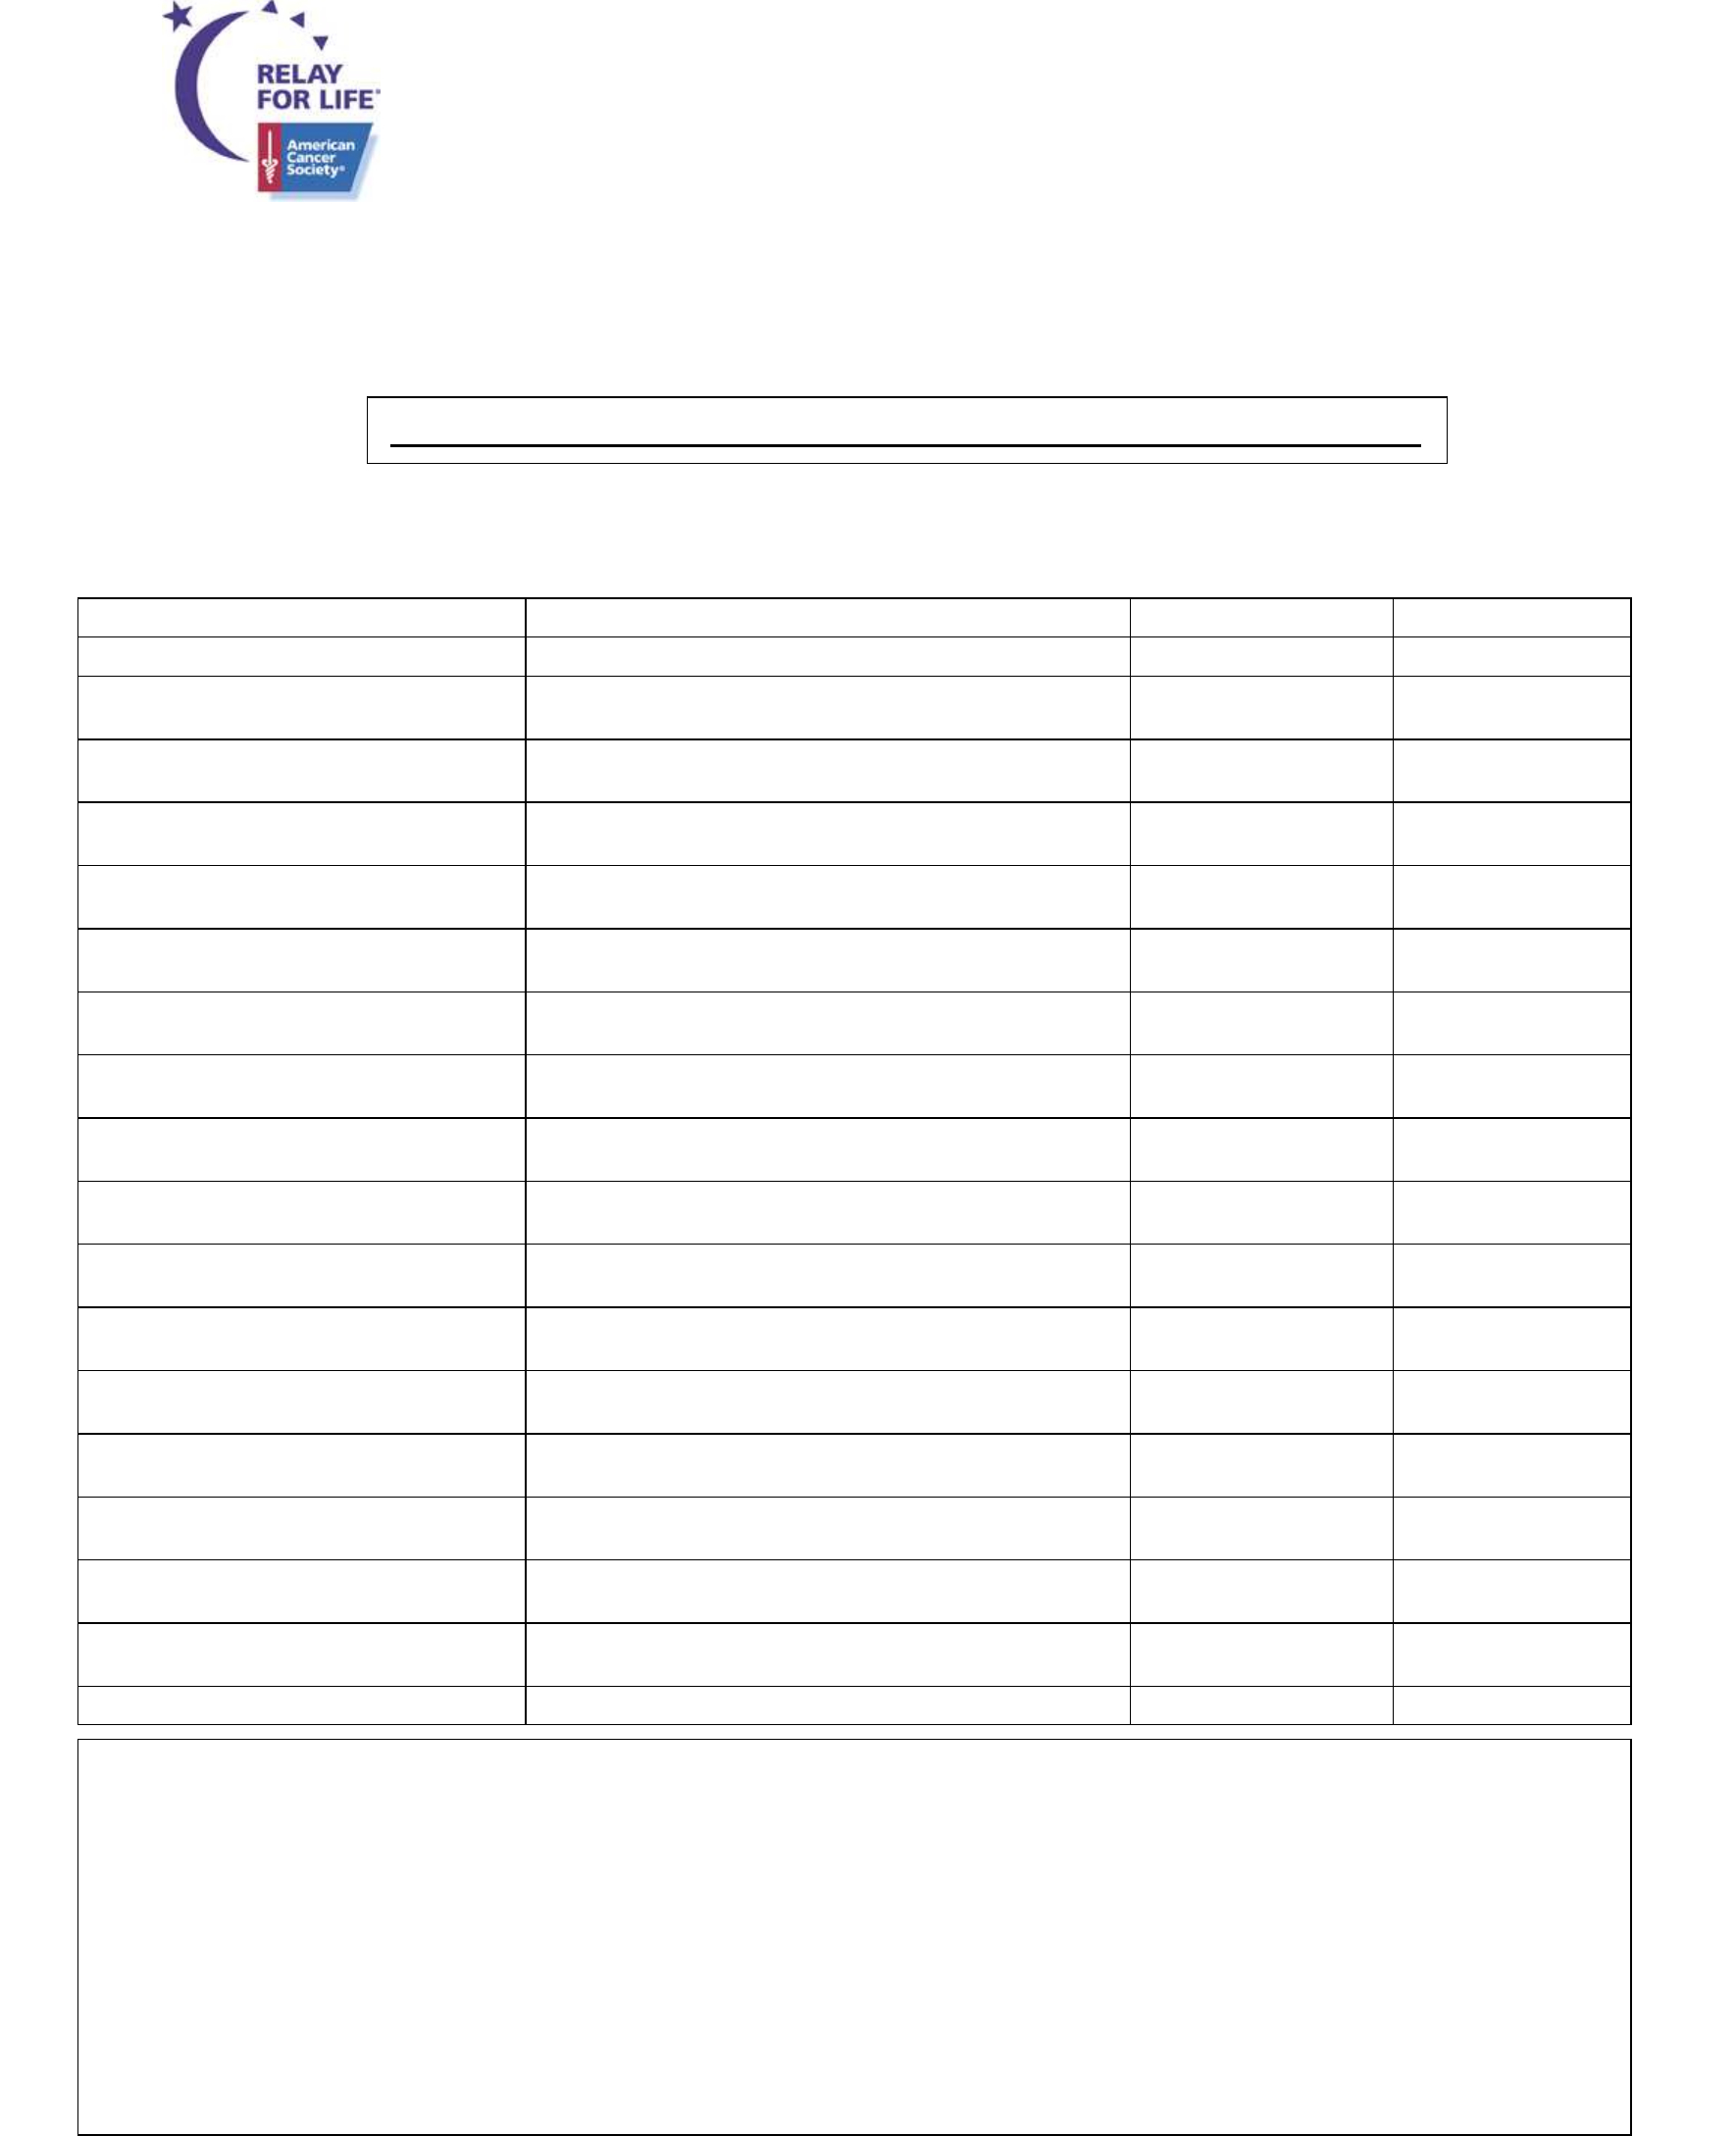 Relay For Life Donation Form – America Free Download Throughout Blank Sponsorship Form Template